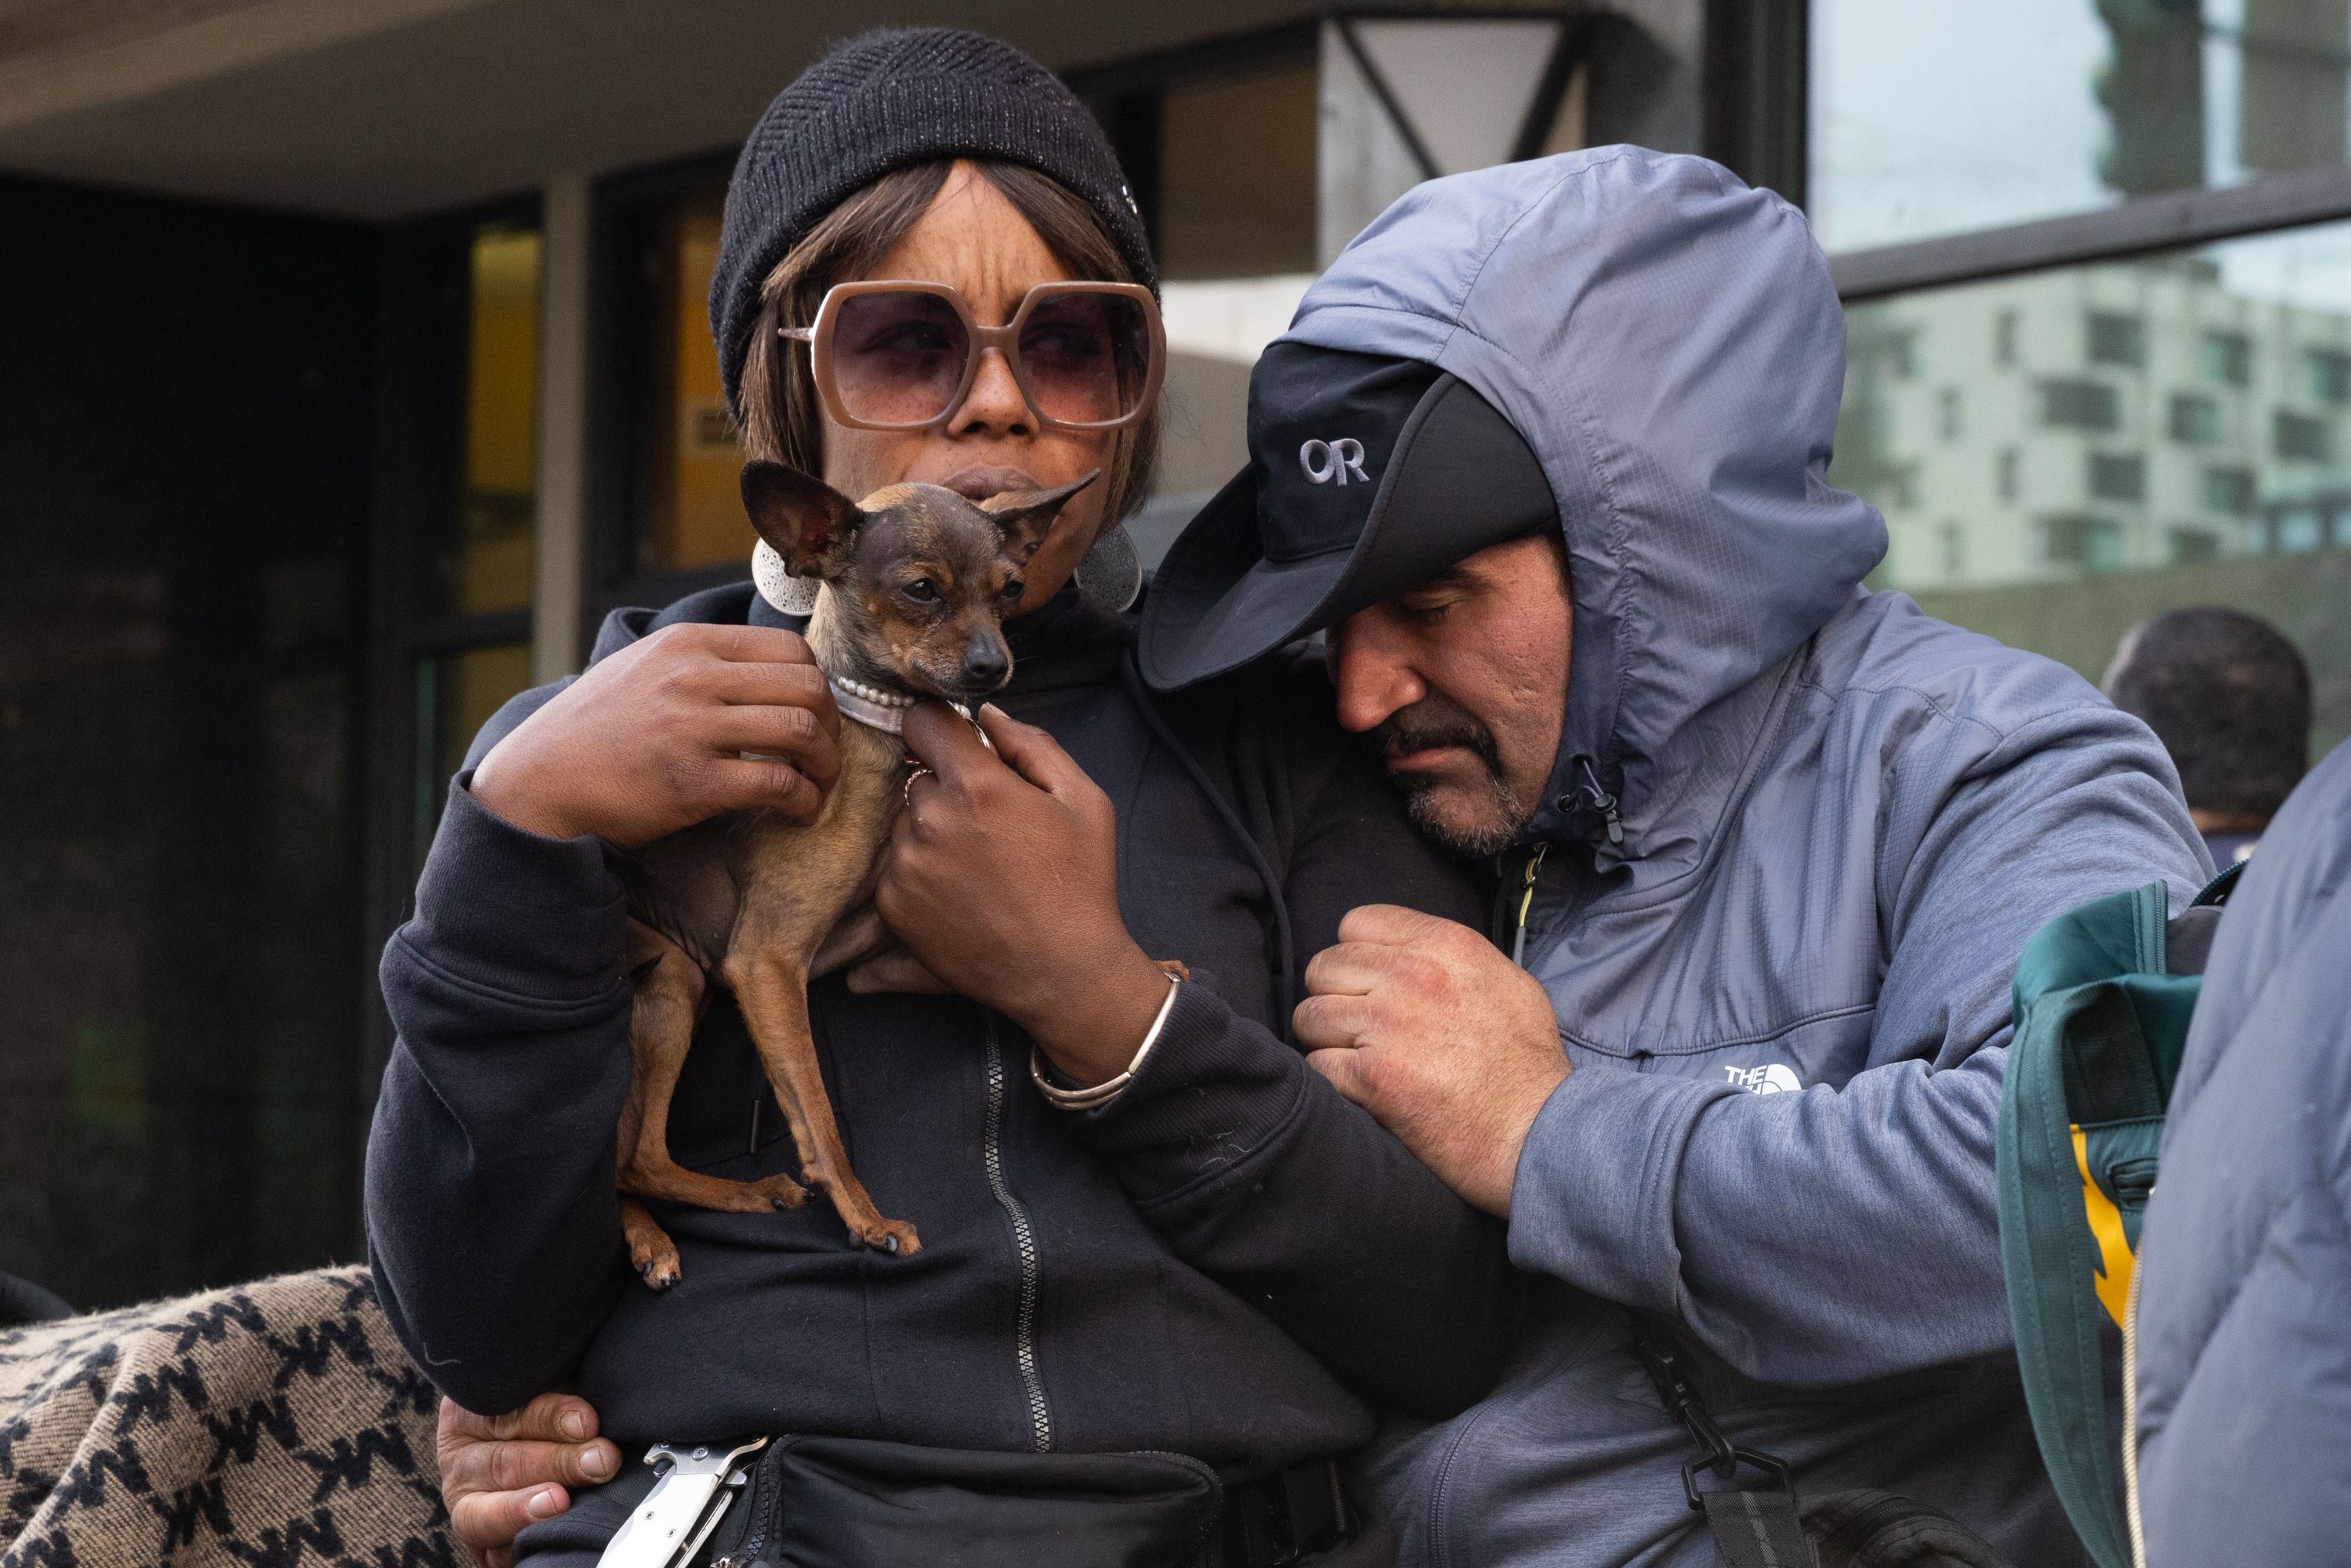 A woman holding a dog sits on a man's lap on sixth street.